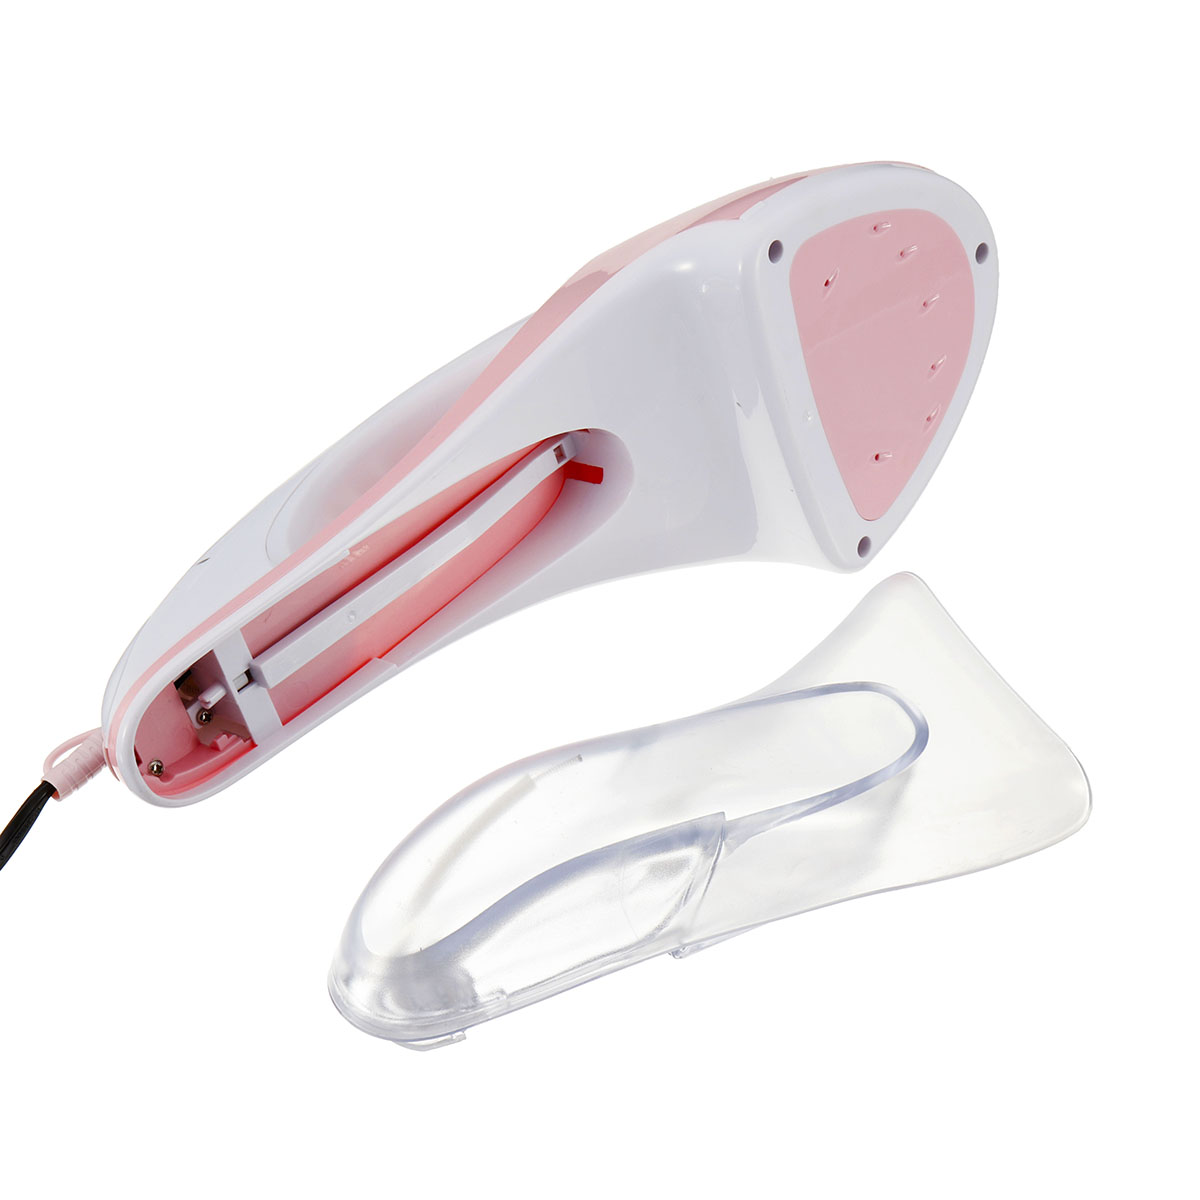 110V-1000W-Handheld-Electric-Steam-Iron-Fabric-Clothes-Garment-Steamer-Dry-Flat-1500430-6